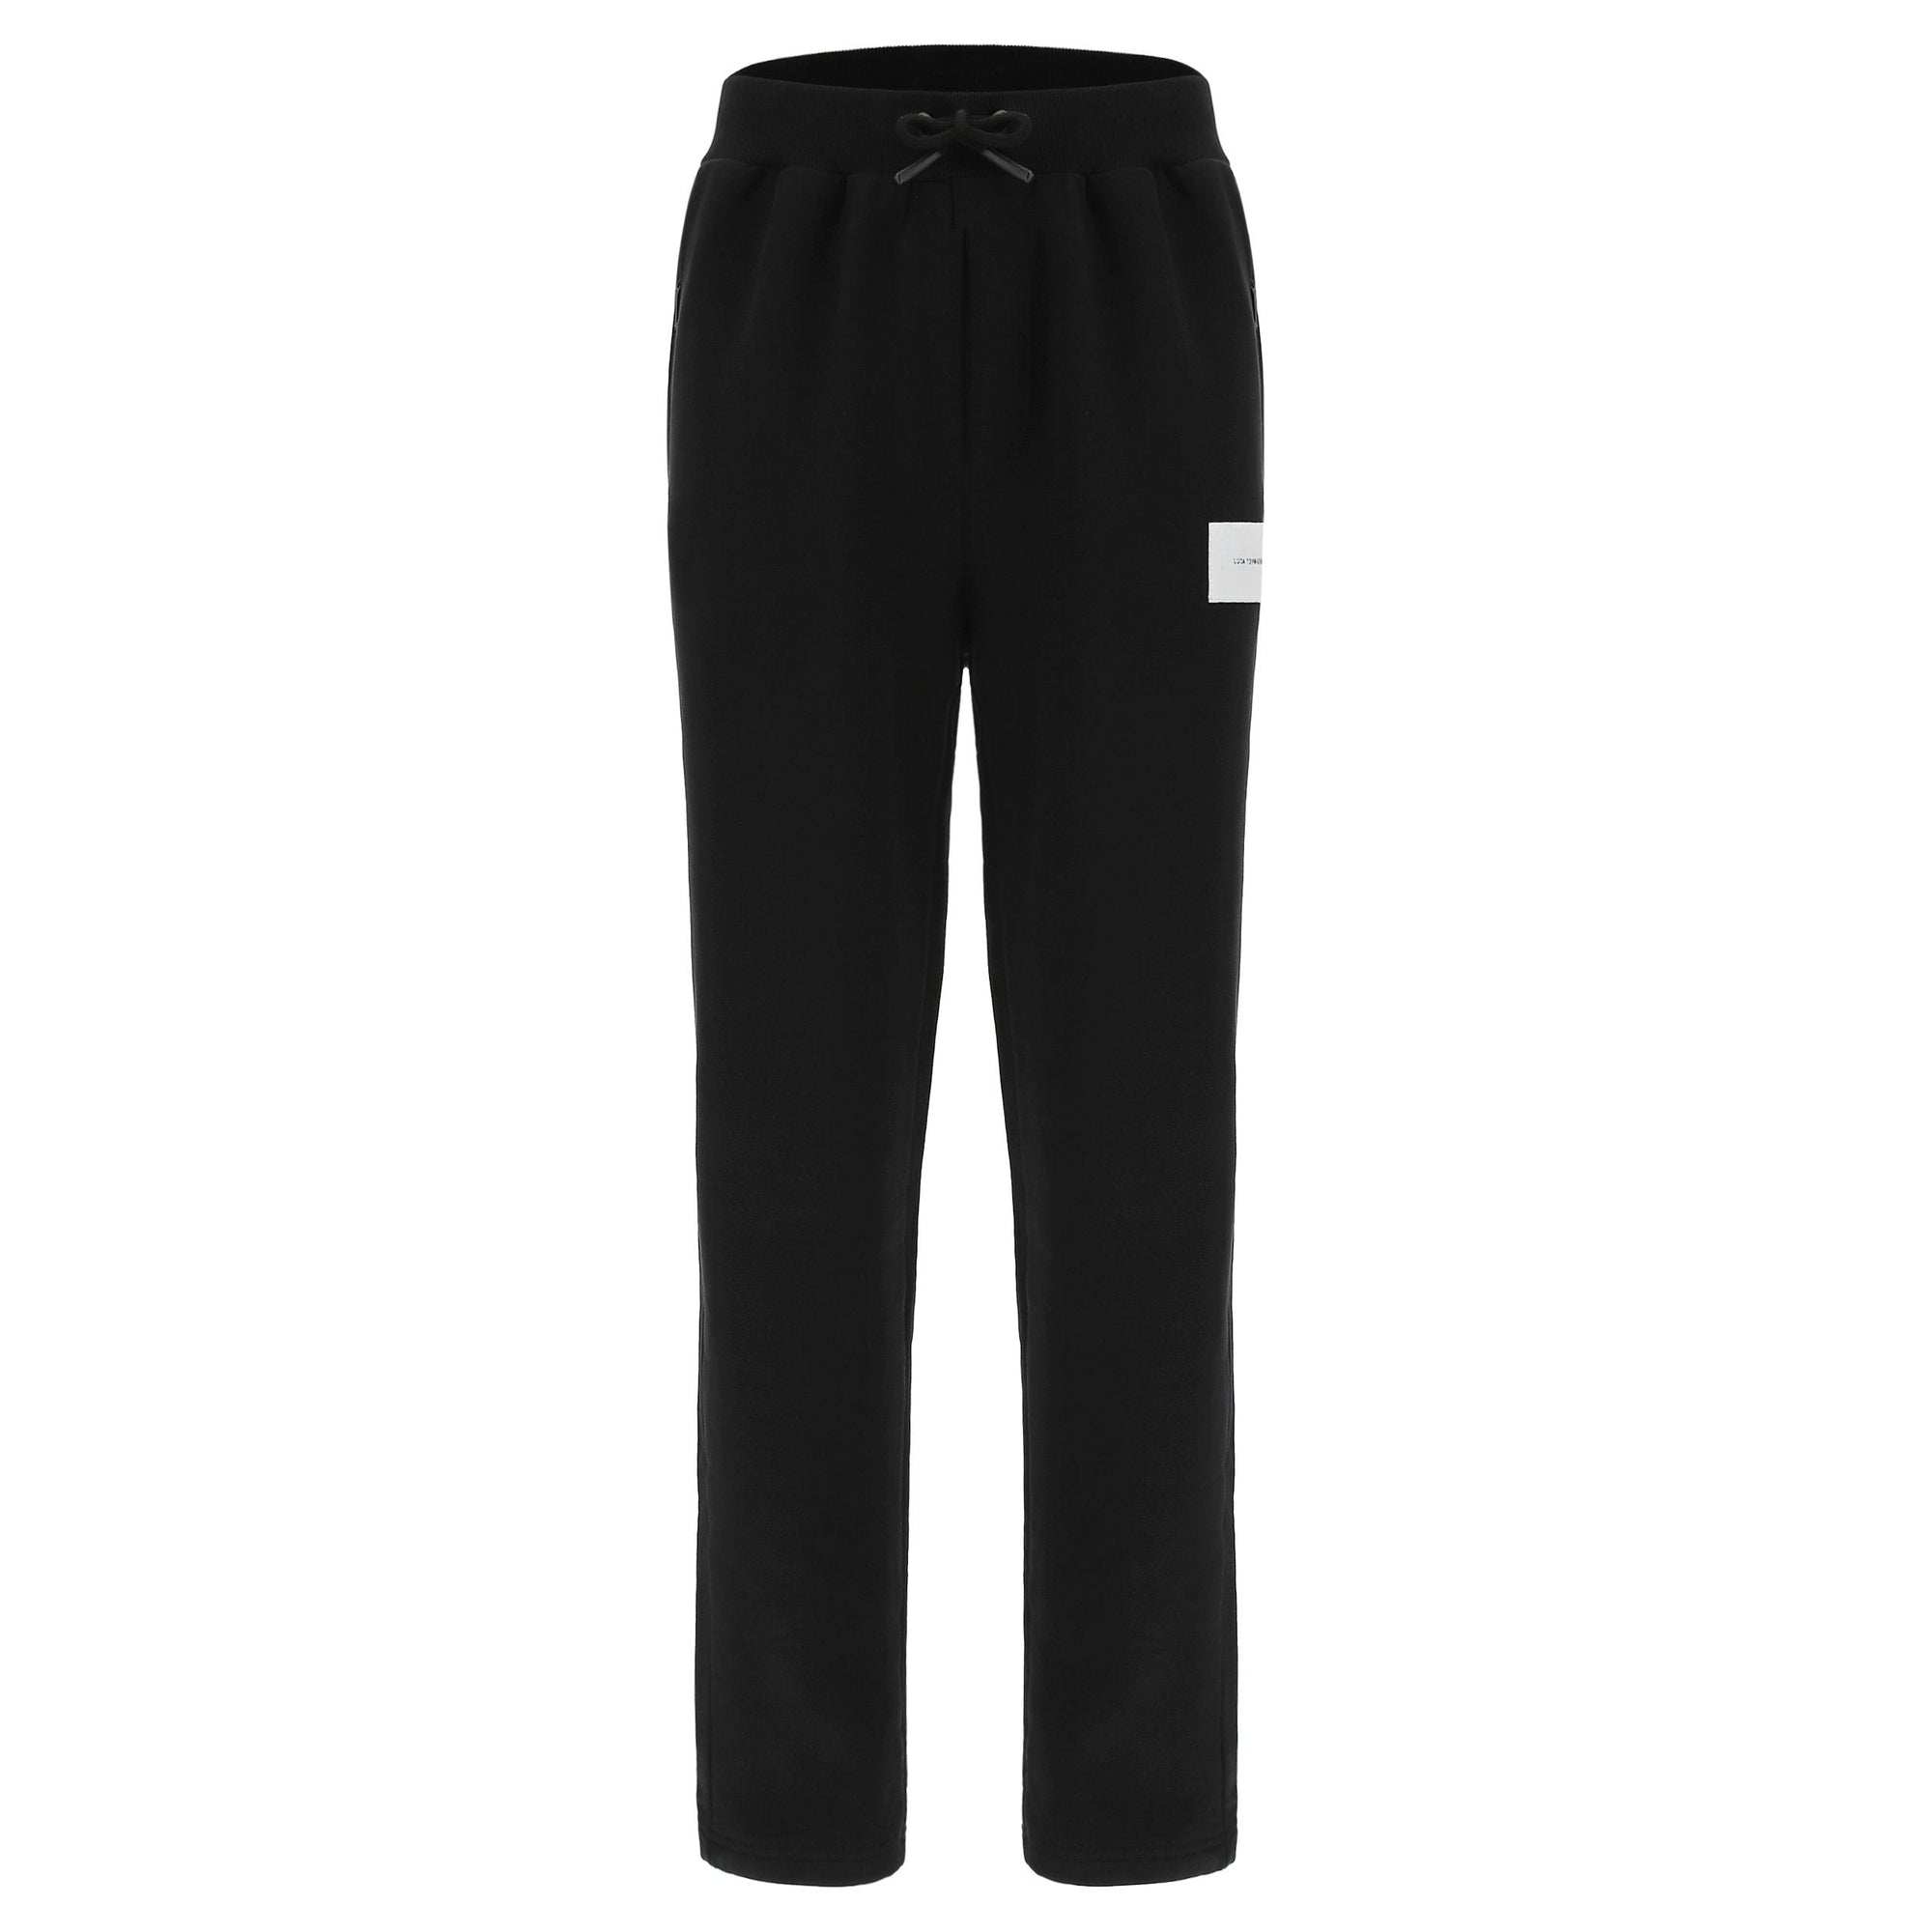 Trousers unisex Dreamer - Black - A Choreography by Luca Tommassini 1